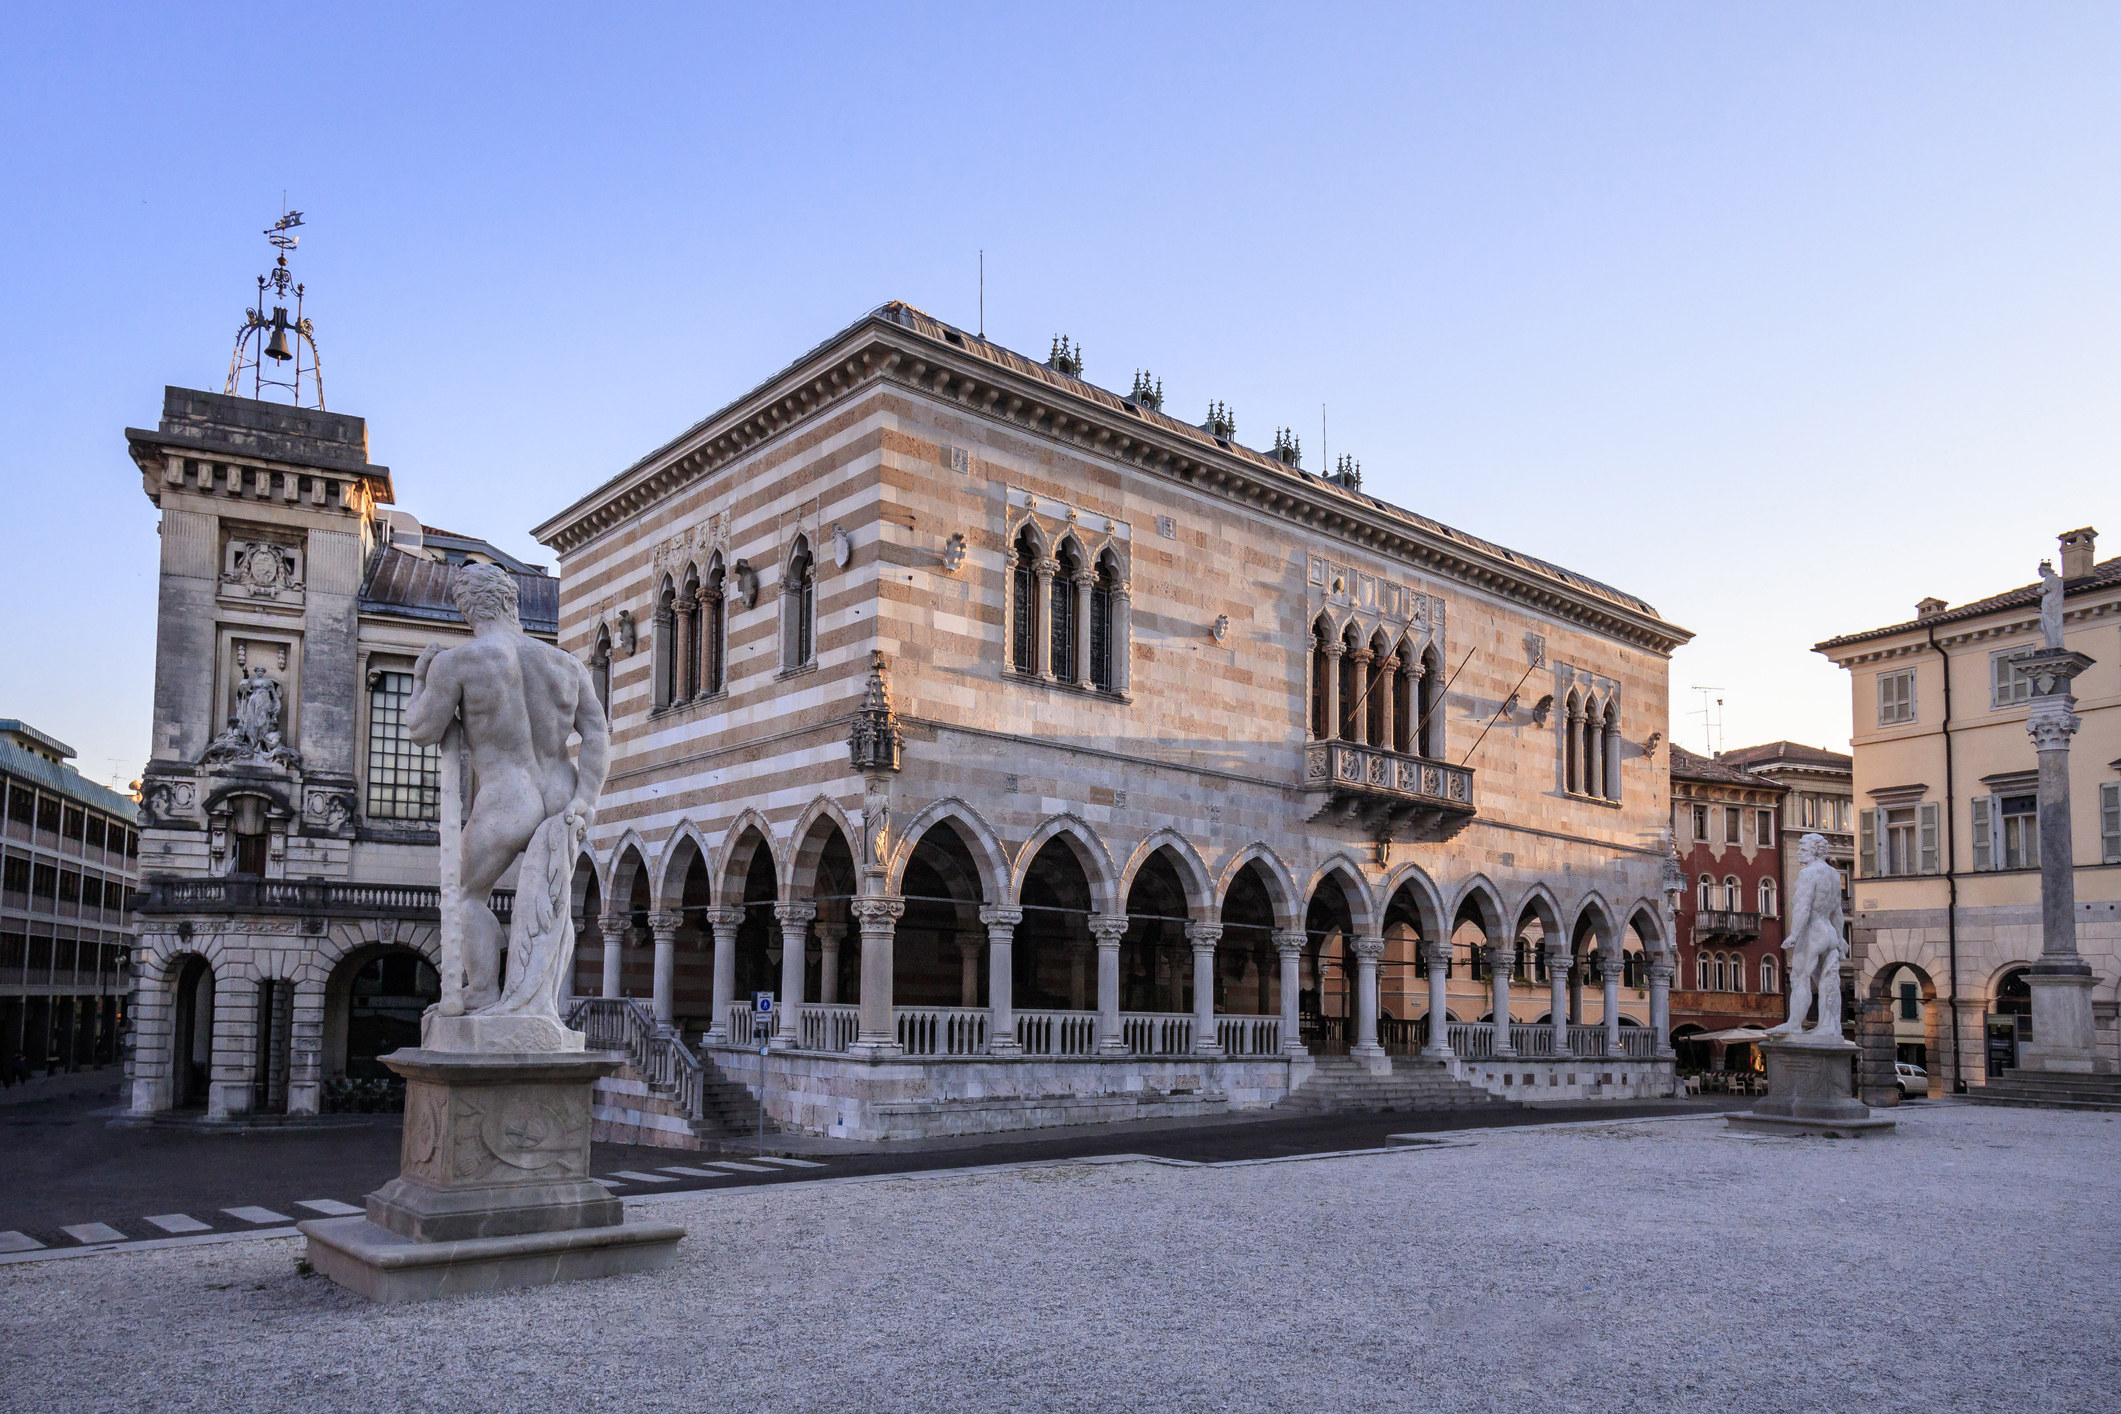 an old square in udine with large sculpture and stone buildings